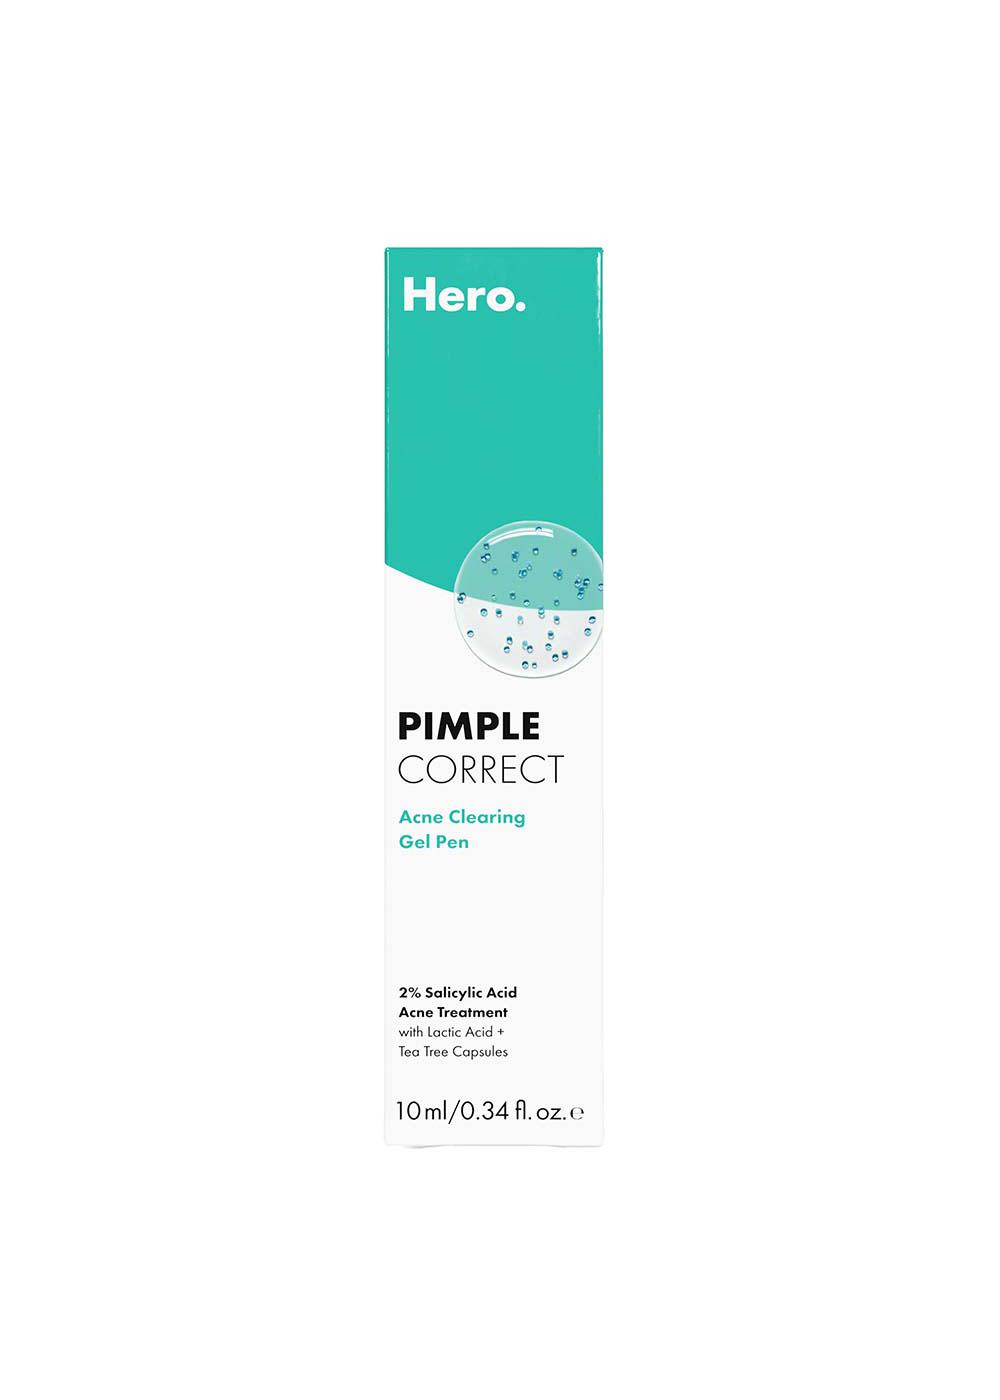 Hero Pimple Correct Acne Clearing Gel Pen; image 1 of 2